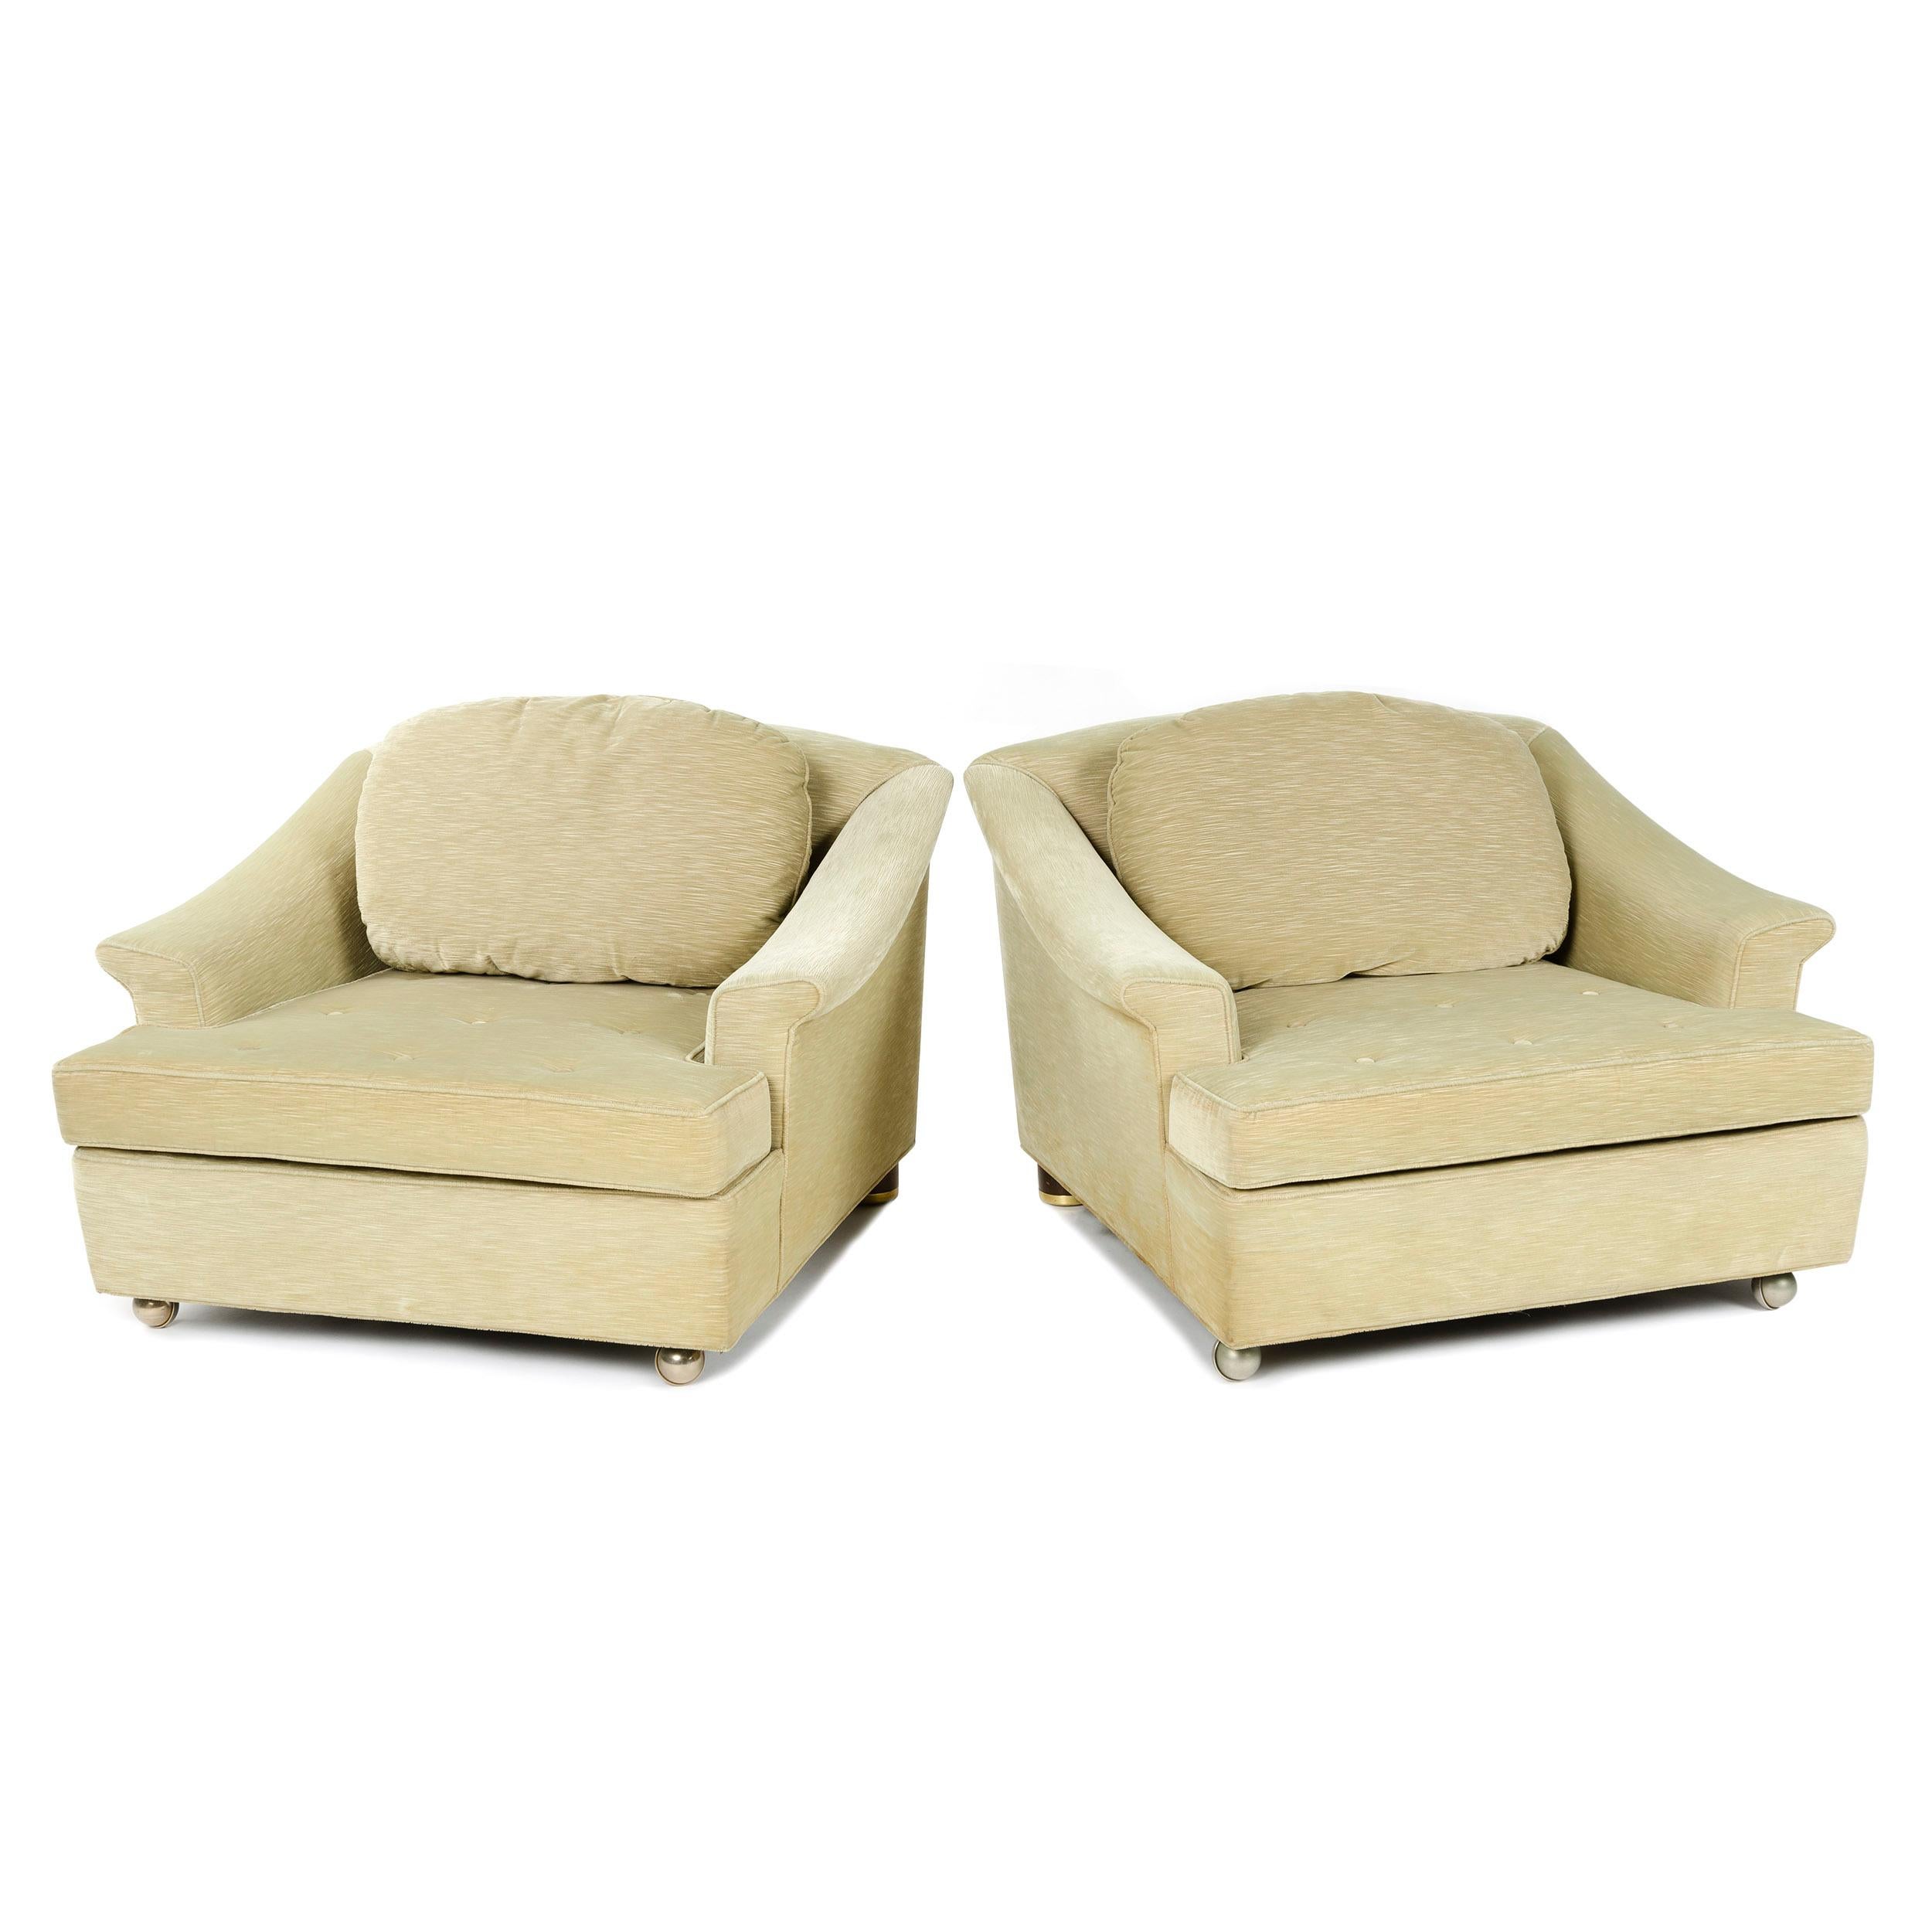 A pair of generously proportioned pillow back chairs with front casters and original upholstery.